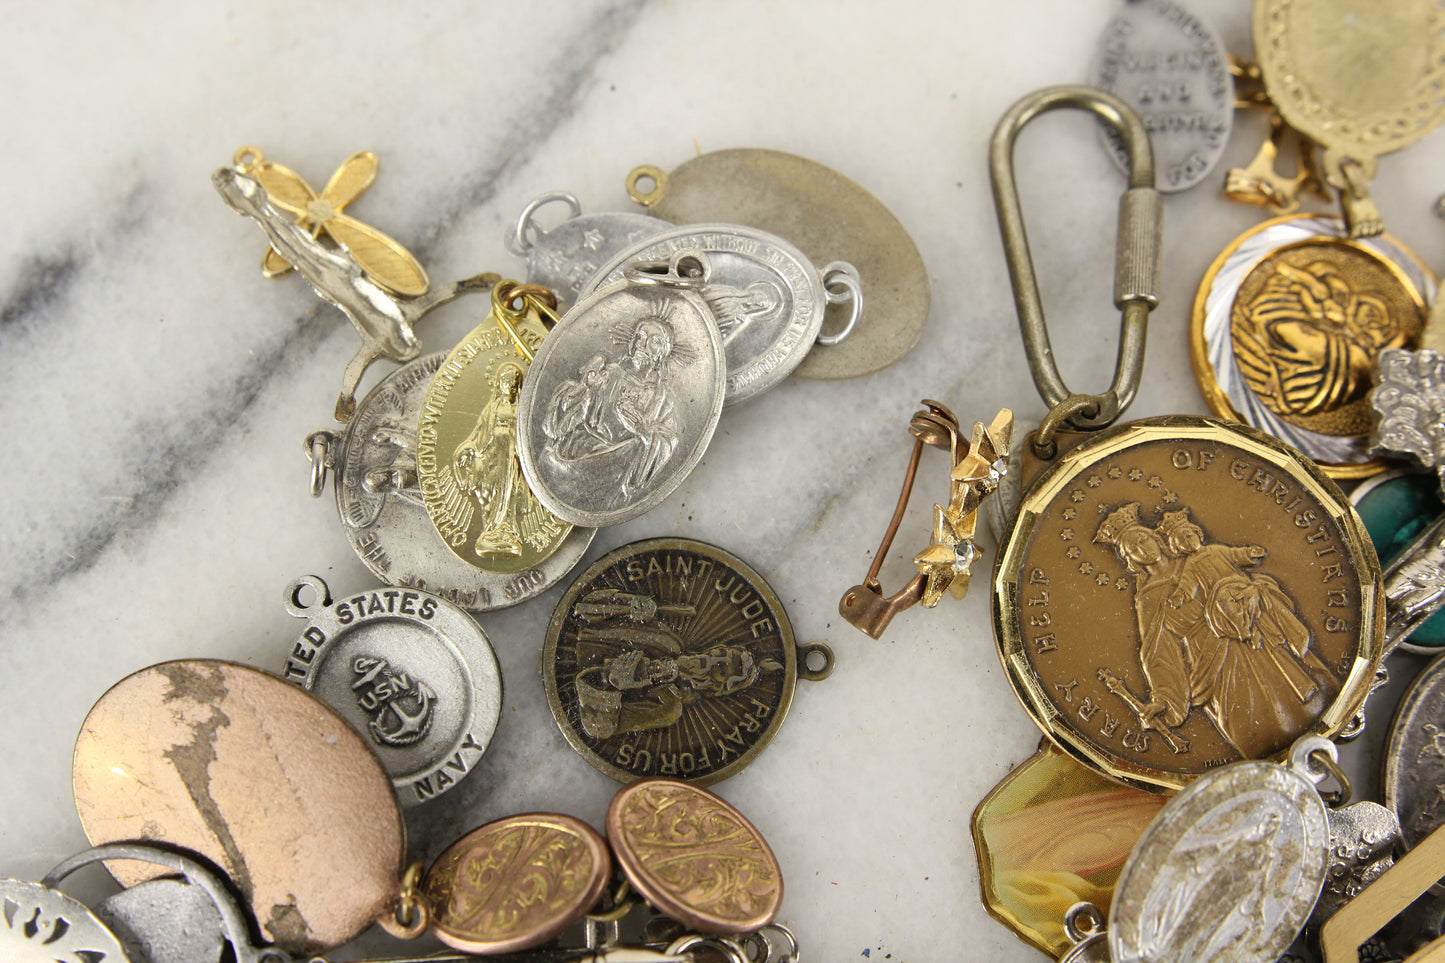 Assorted Vintage Religious Charms and Tokens